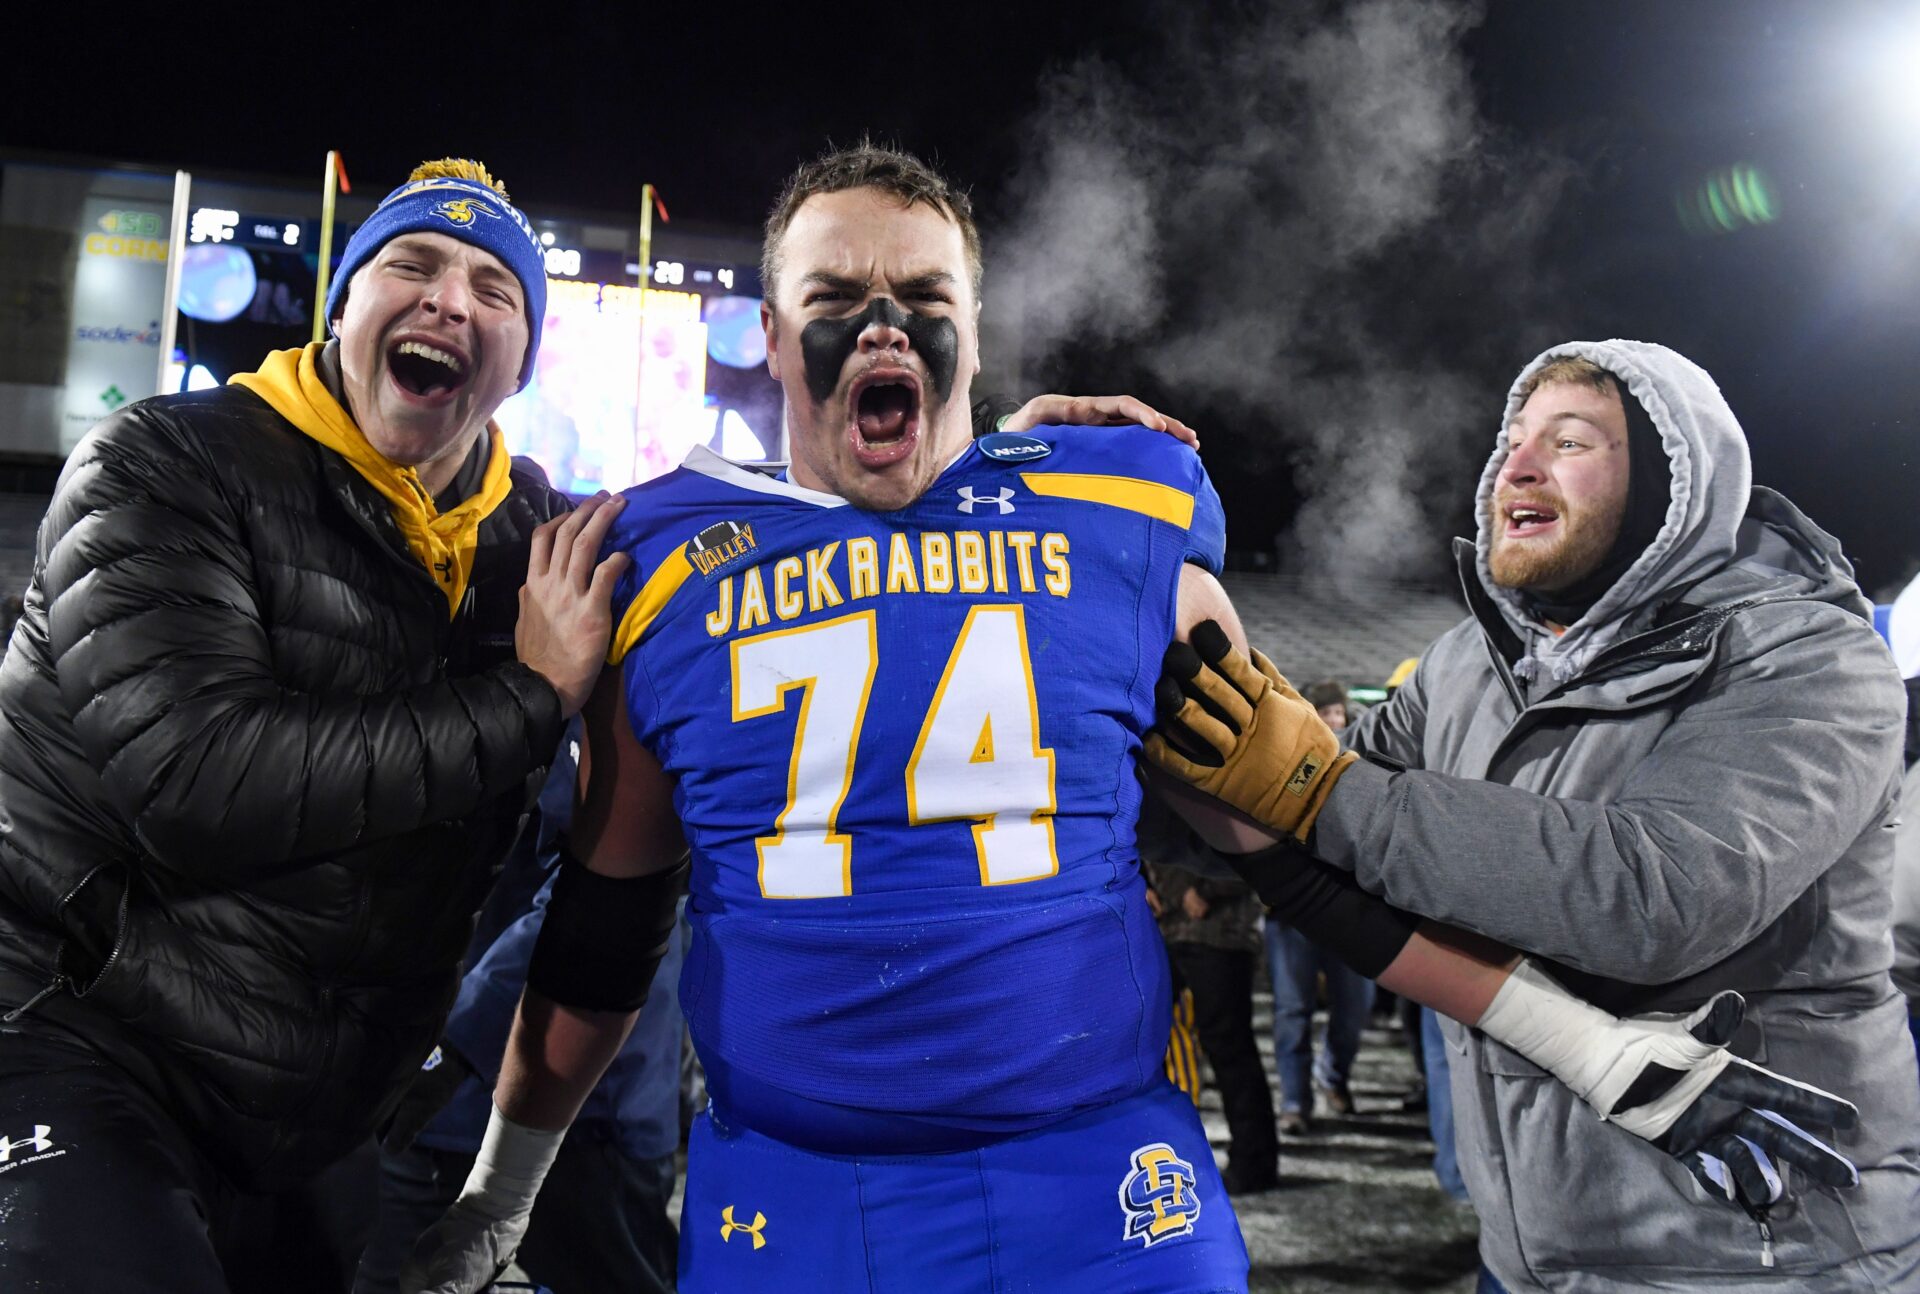 South Dakota State’s Garret Greenfield yells in celebration with friends after the team beats Montana State in the FCS semifinals on Saturday, December 17, 2022, at Dana J. Dykhouse Stadium in Brookings, SD.